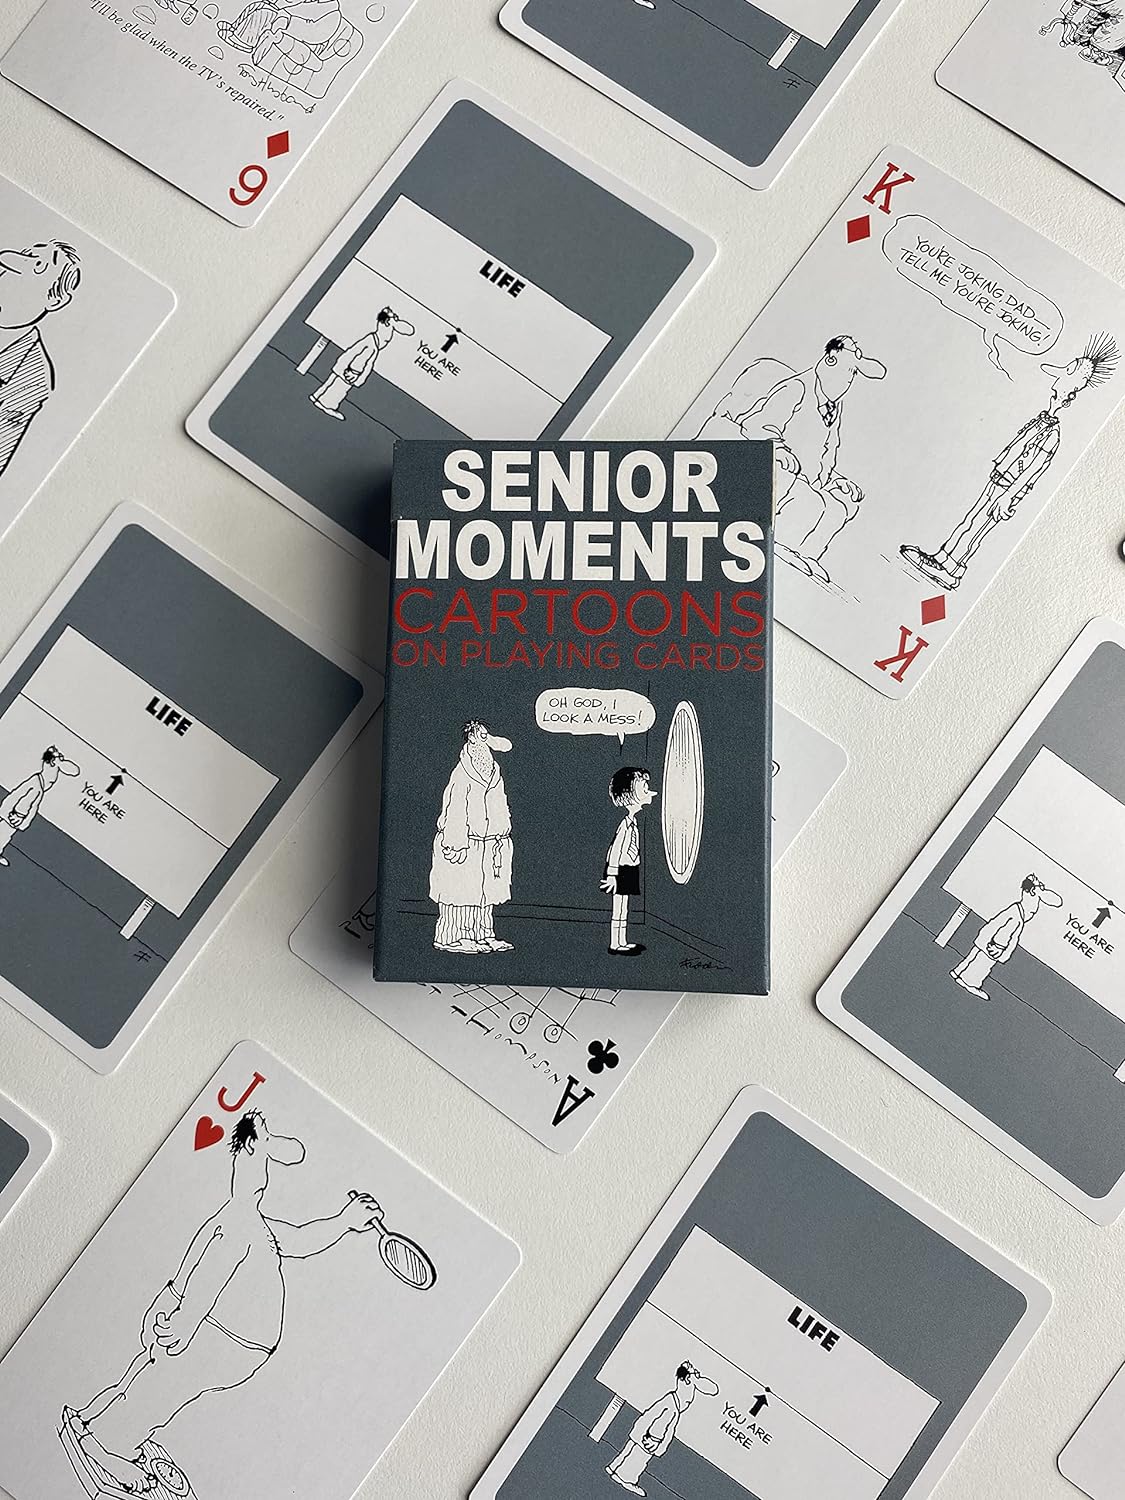 Senior Moments Playing Cards by Piatnik - A Lighthearted Take on Aging